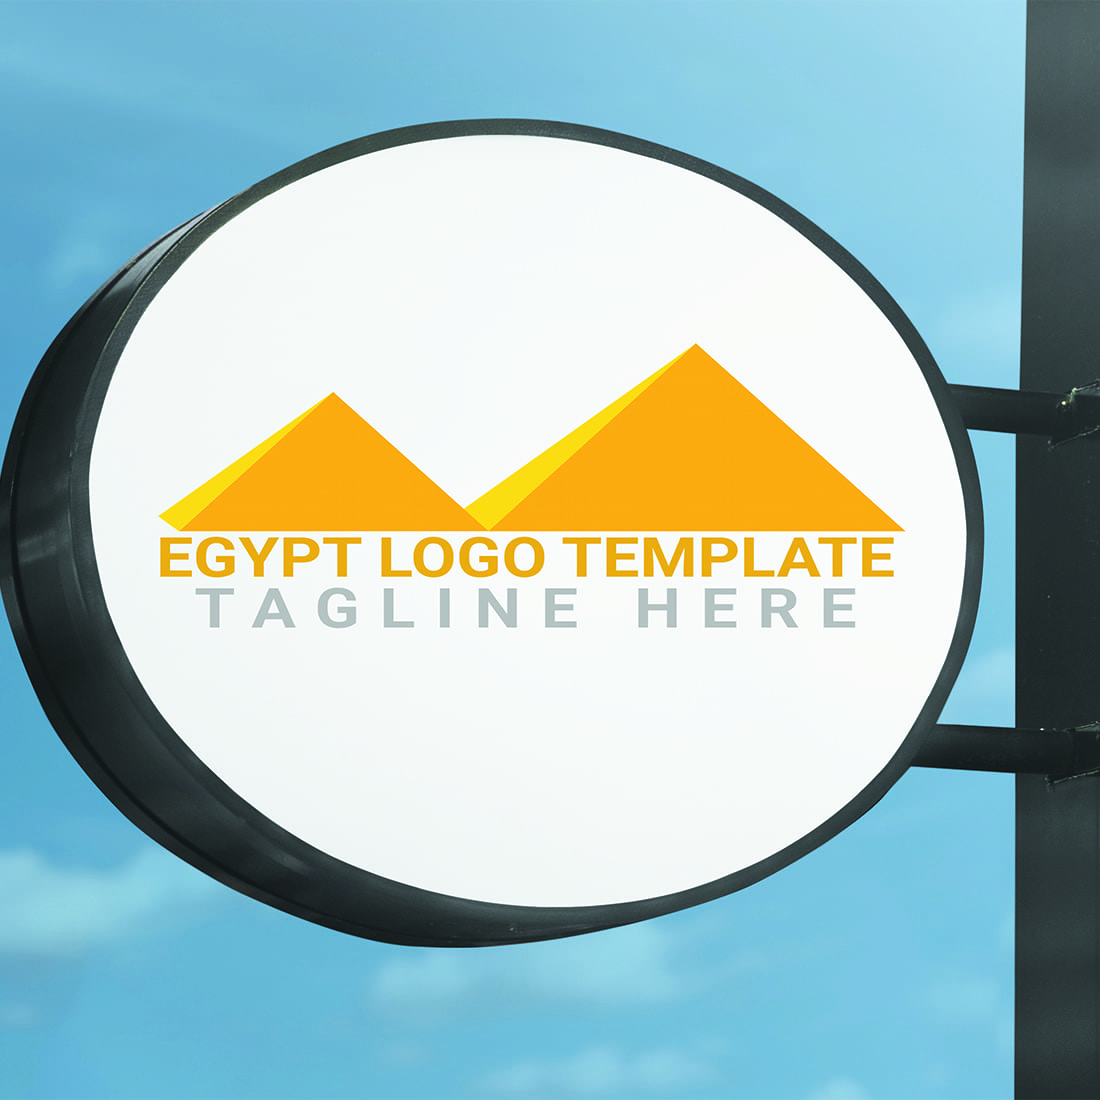 Ancient Egypt sacred EGYPT LOGO TEMPLATE IN $15 BUY NOW preview image.